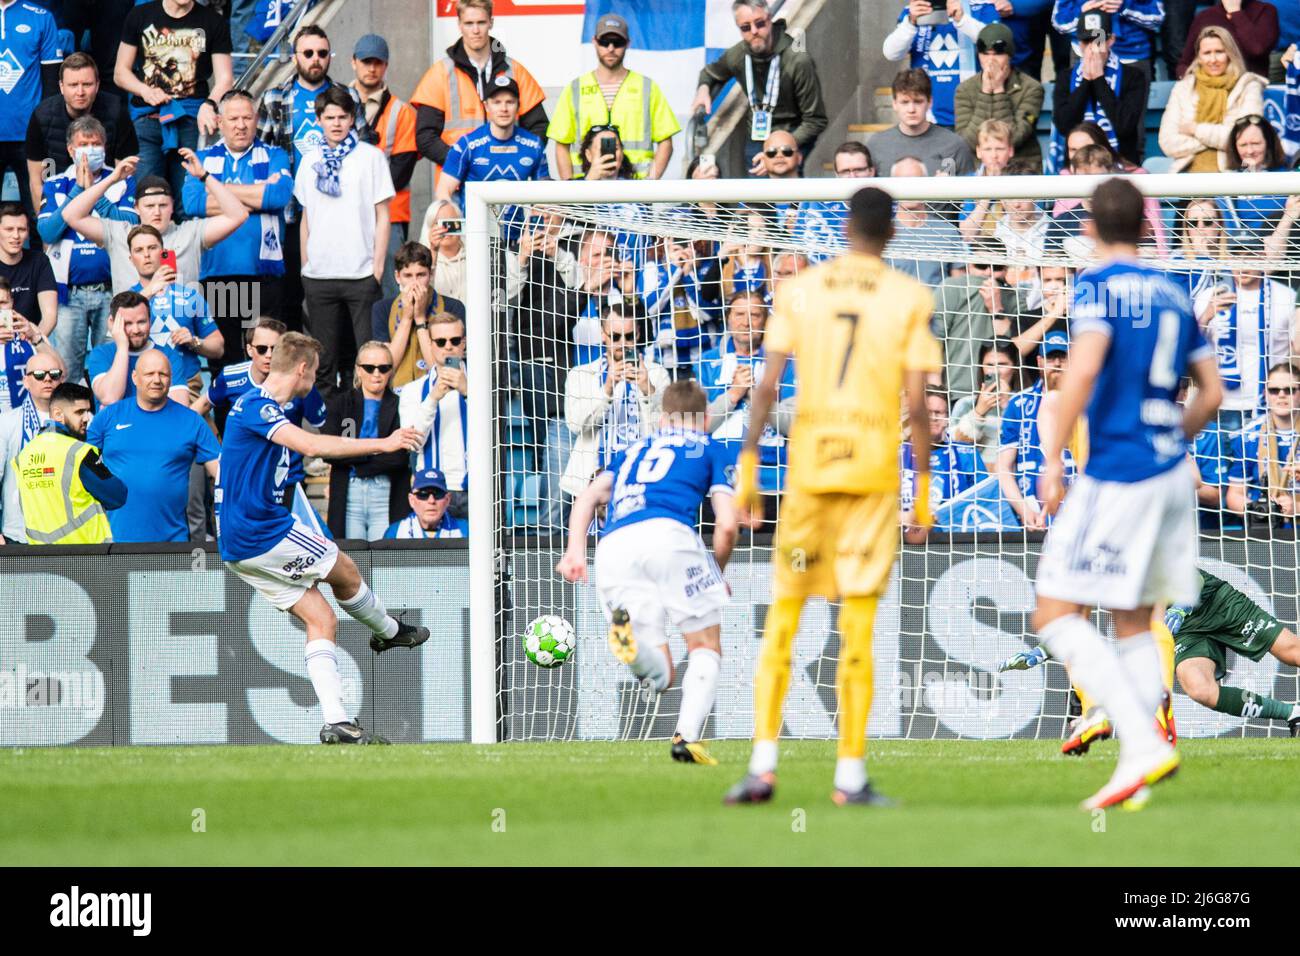 Oslo, Norway. 01st, May 2022. Sivert Heggheim Mannsverk (8) of Molde scores for 0-1 from the penalty spot during the Norwegian Cup final, the NM Menn final, between Bodoe/Glimt and Molde at Ullevaal Stadion in Oslo. (Photo credit: Gonzales Photo - Jan-Erik Eriksen). Credit: Gonzales Photo/Alamy Live News Stock Photo